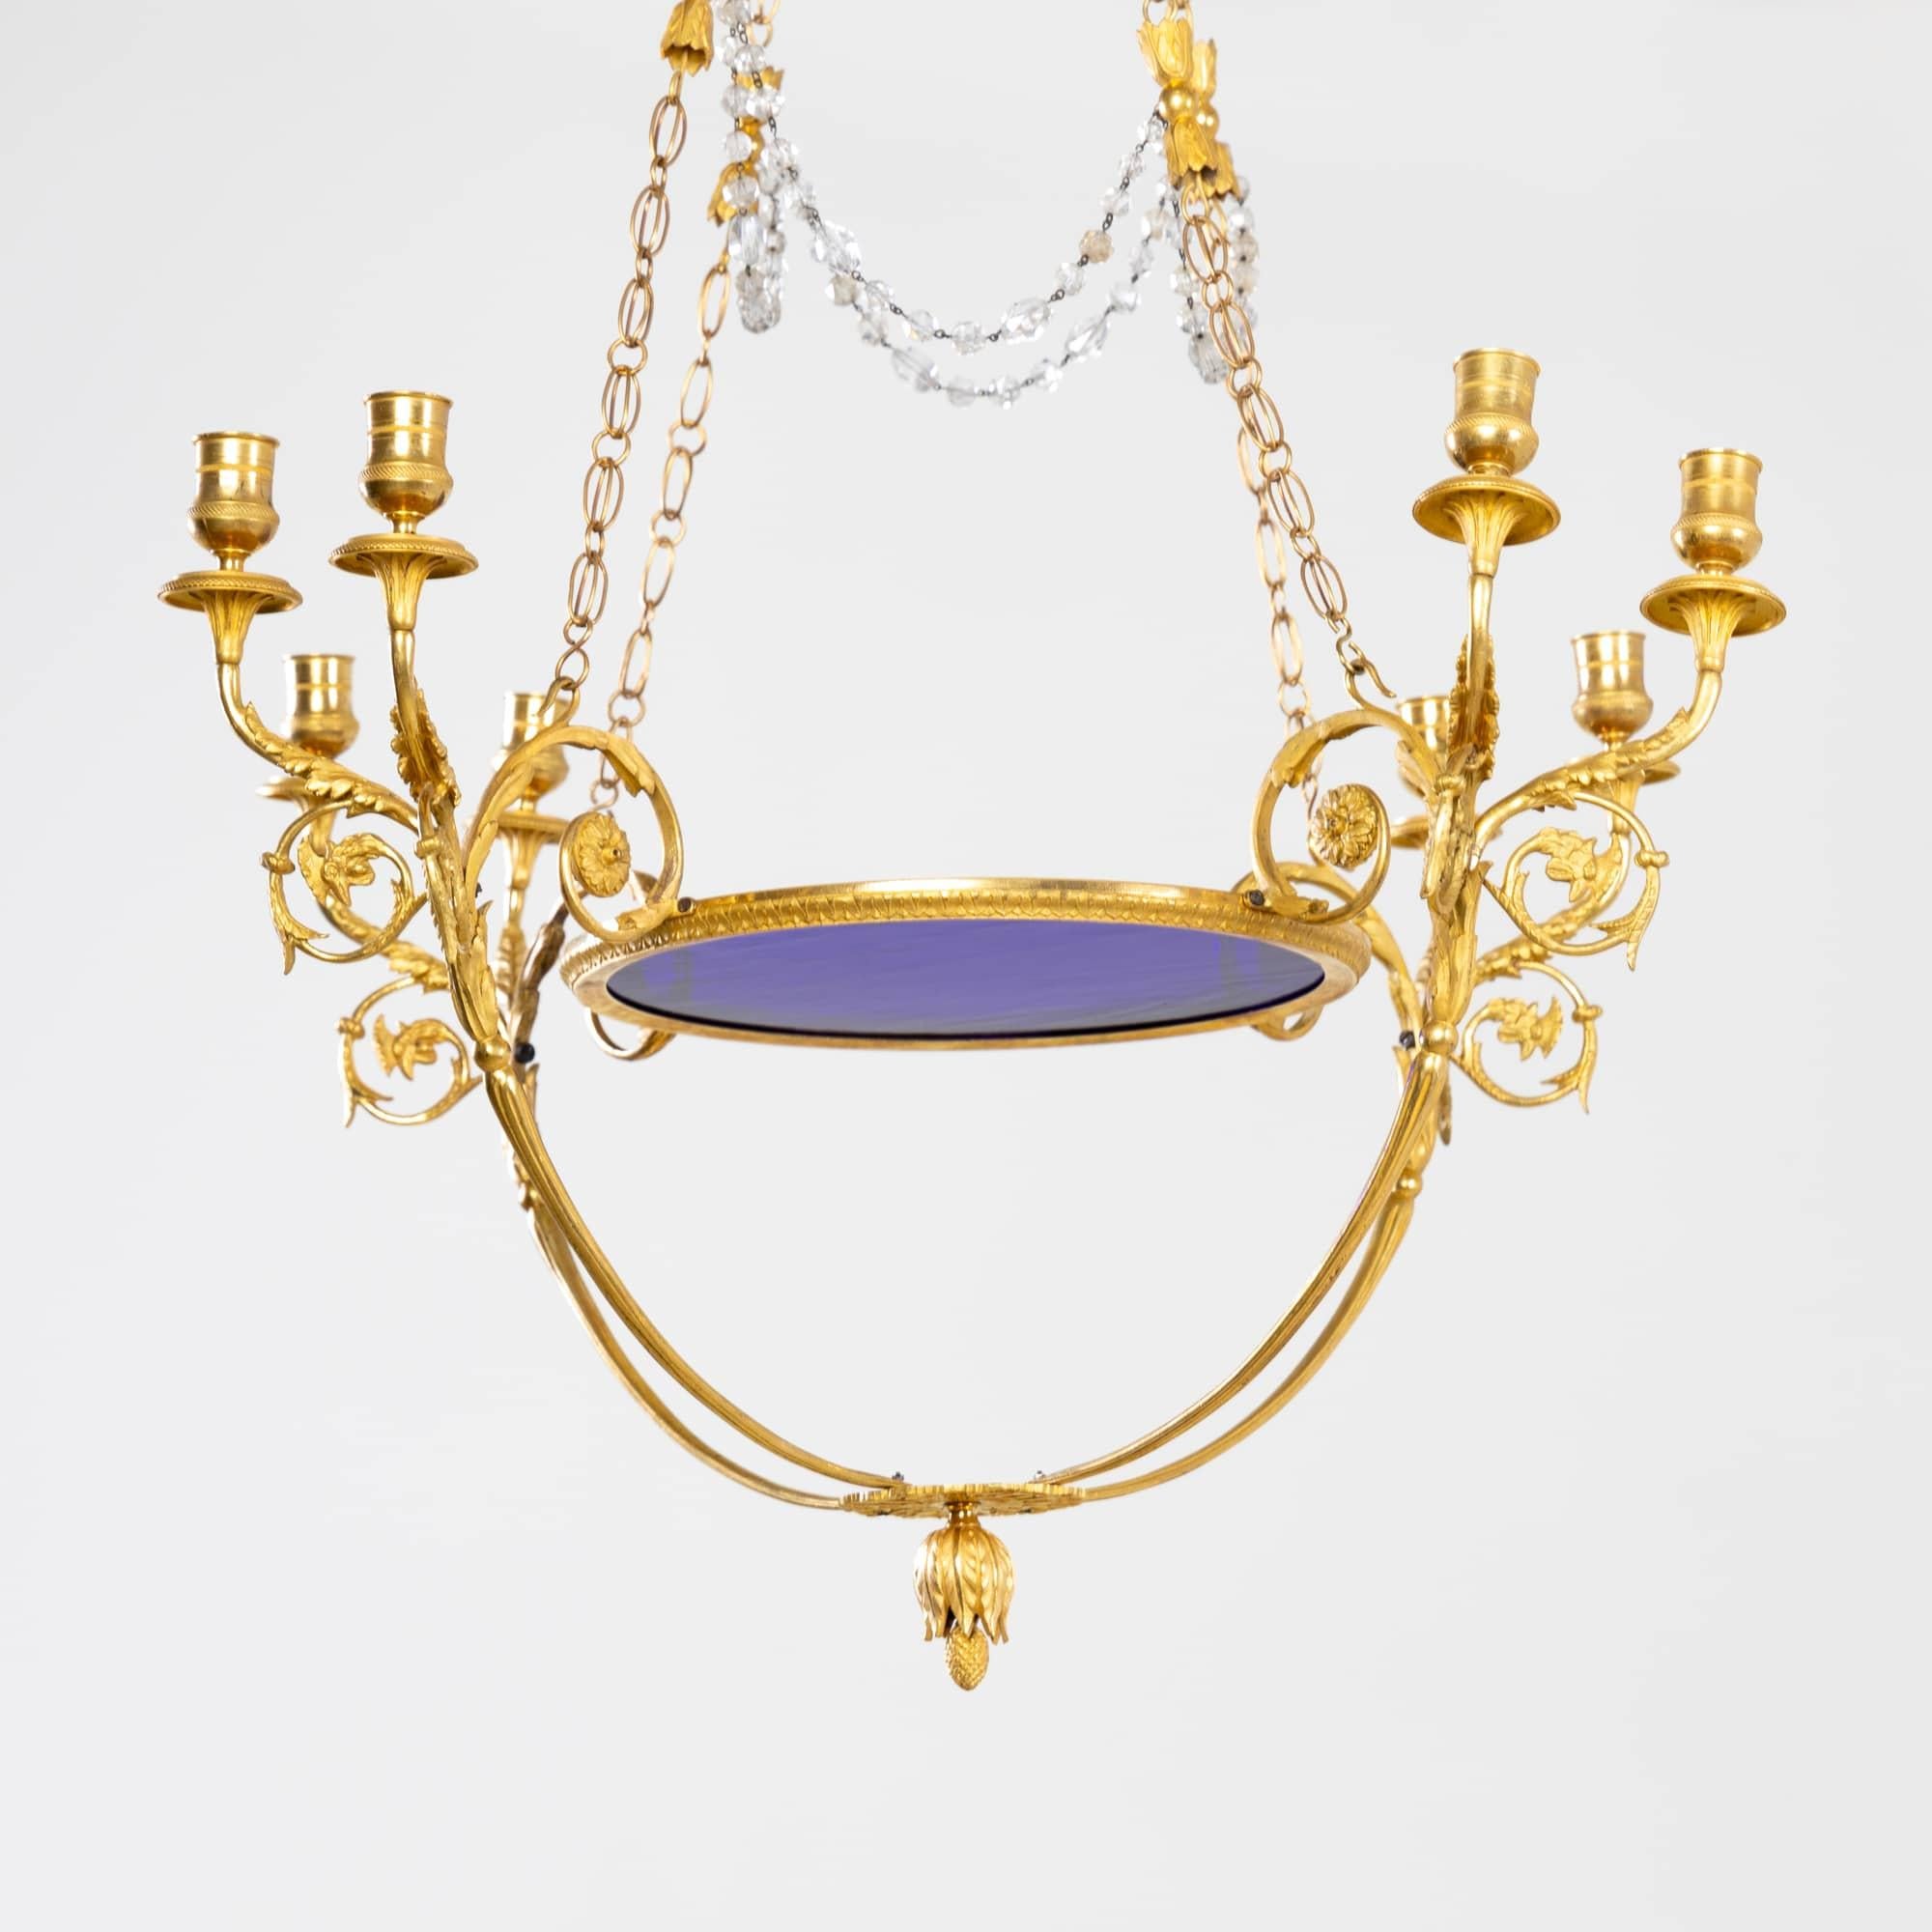 Large eight-flame chandelier of the Russian Empire with cobalt blue glass and fire-gilded arms with cockerel decoration and hanging pine cone. The supporting hoop is connected by four link chains to the ceiling crown, which consists of a glass dome